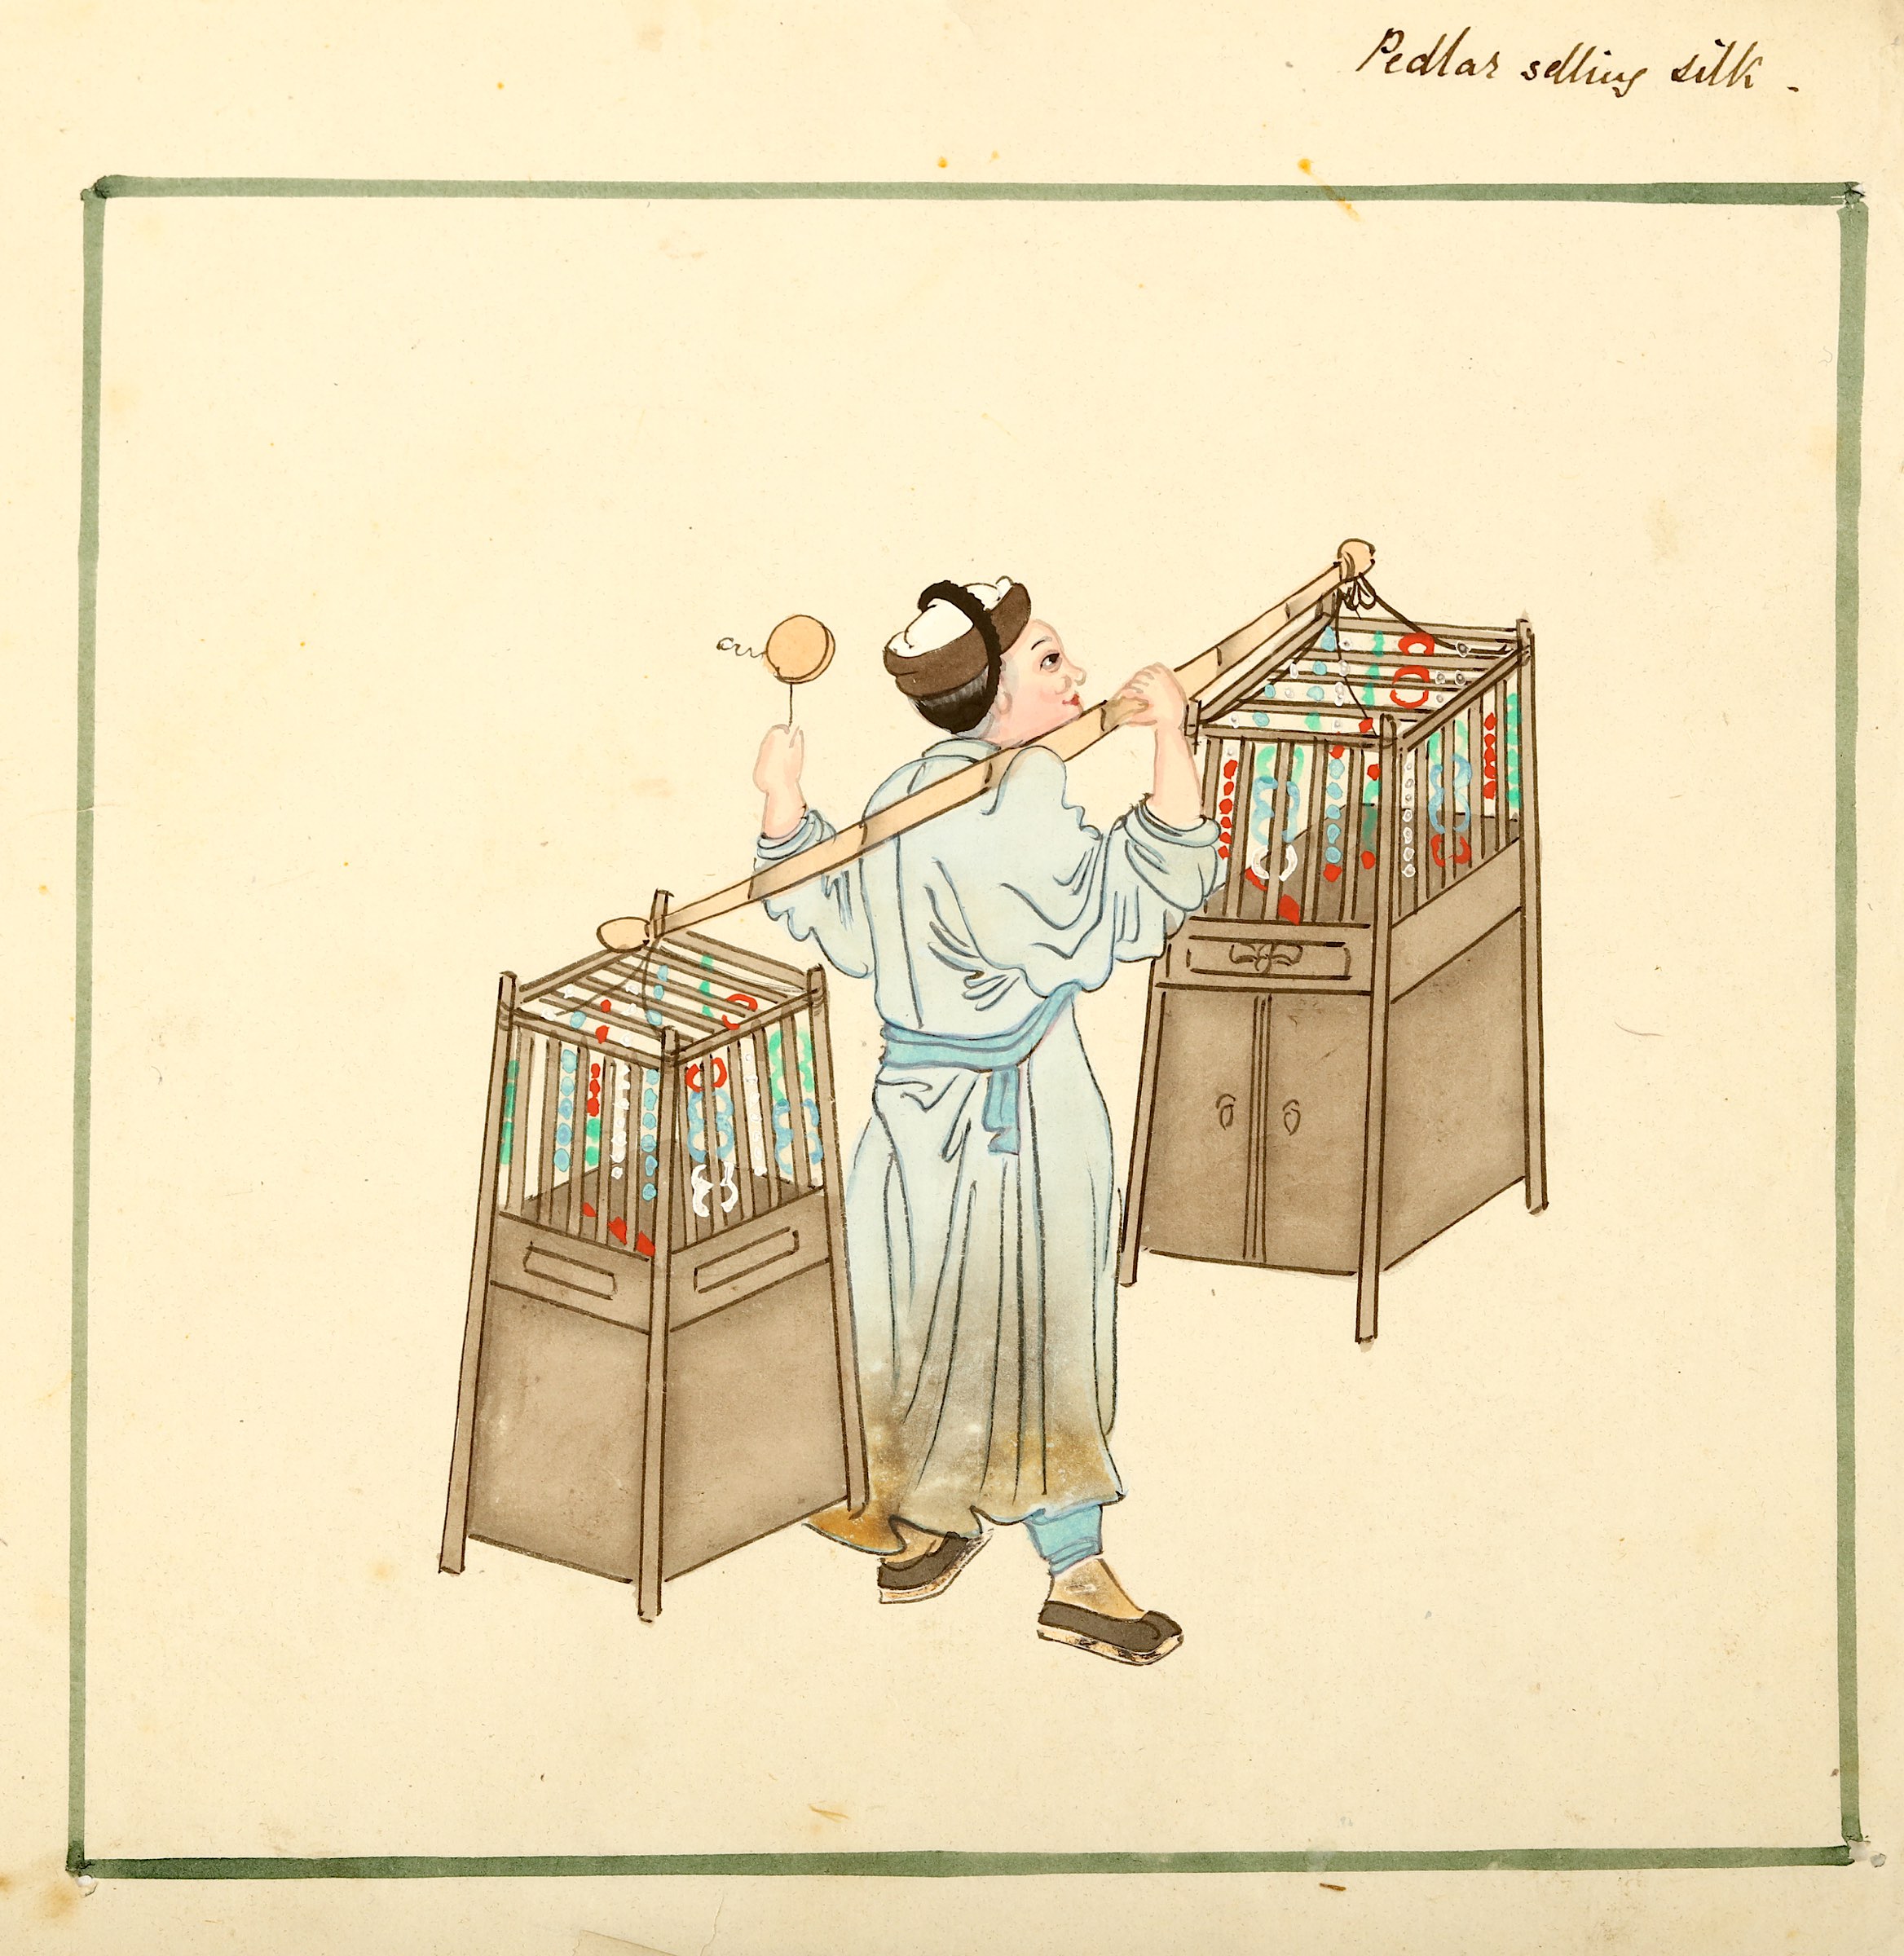 Chinese Trades.- Six subjects comprising Pedlar selling silk, Winding cotton, Embroiderers,